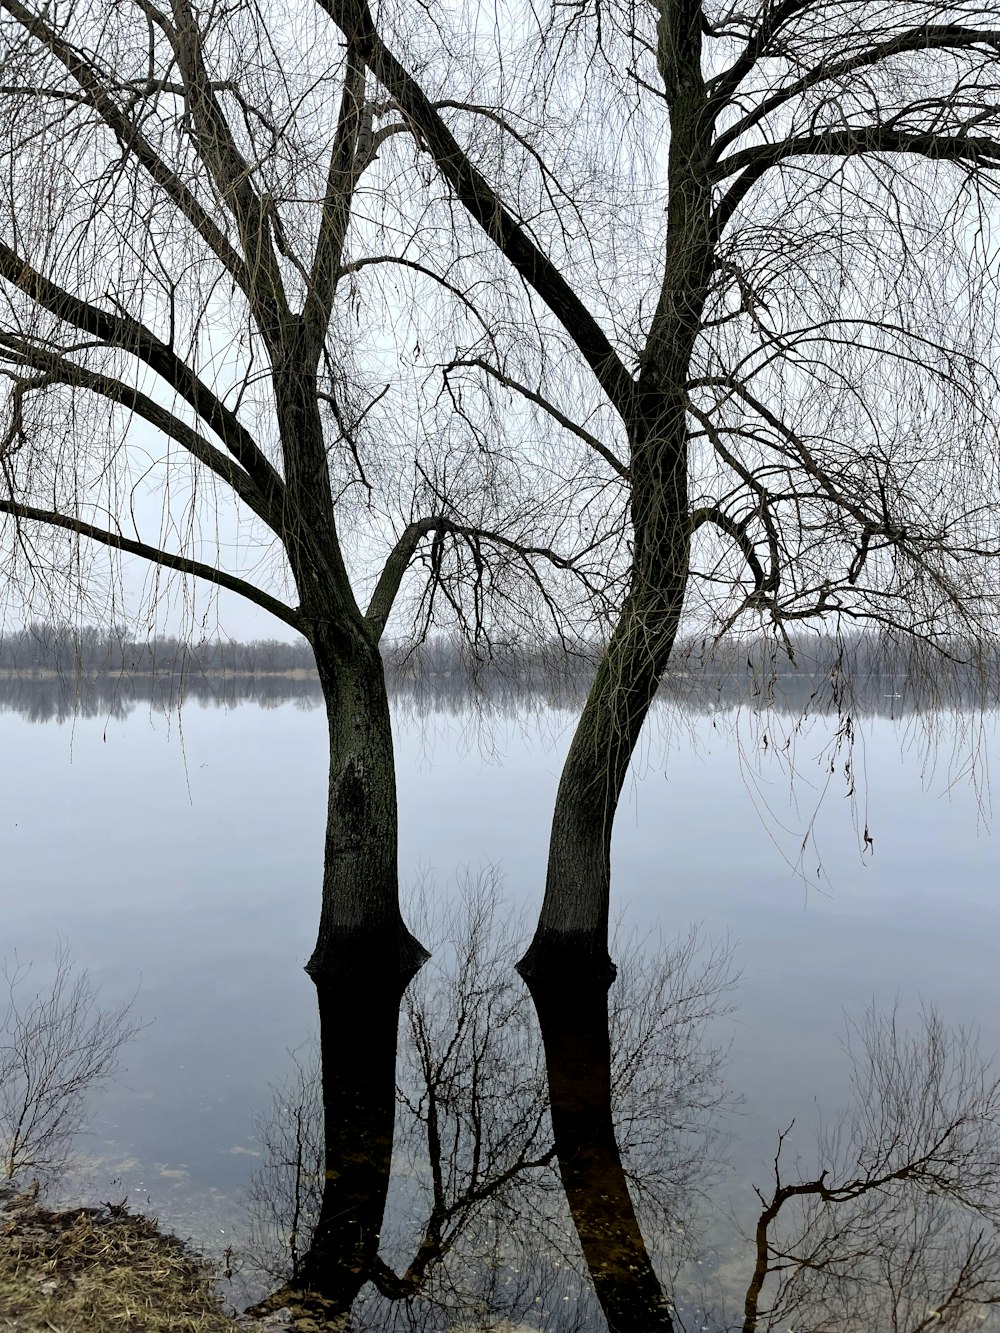 a couple of trees sitting next to a body of water